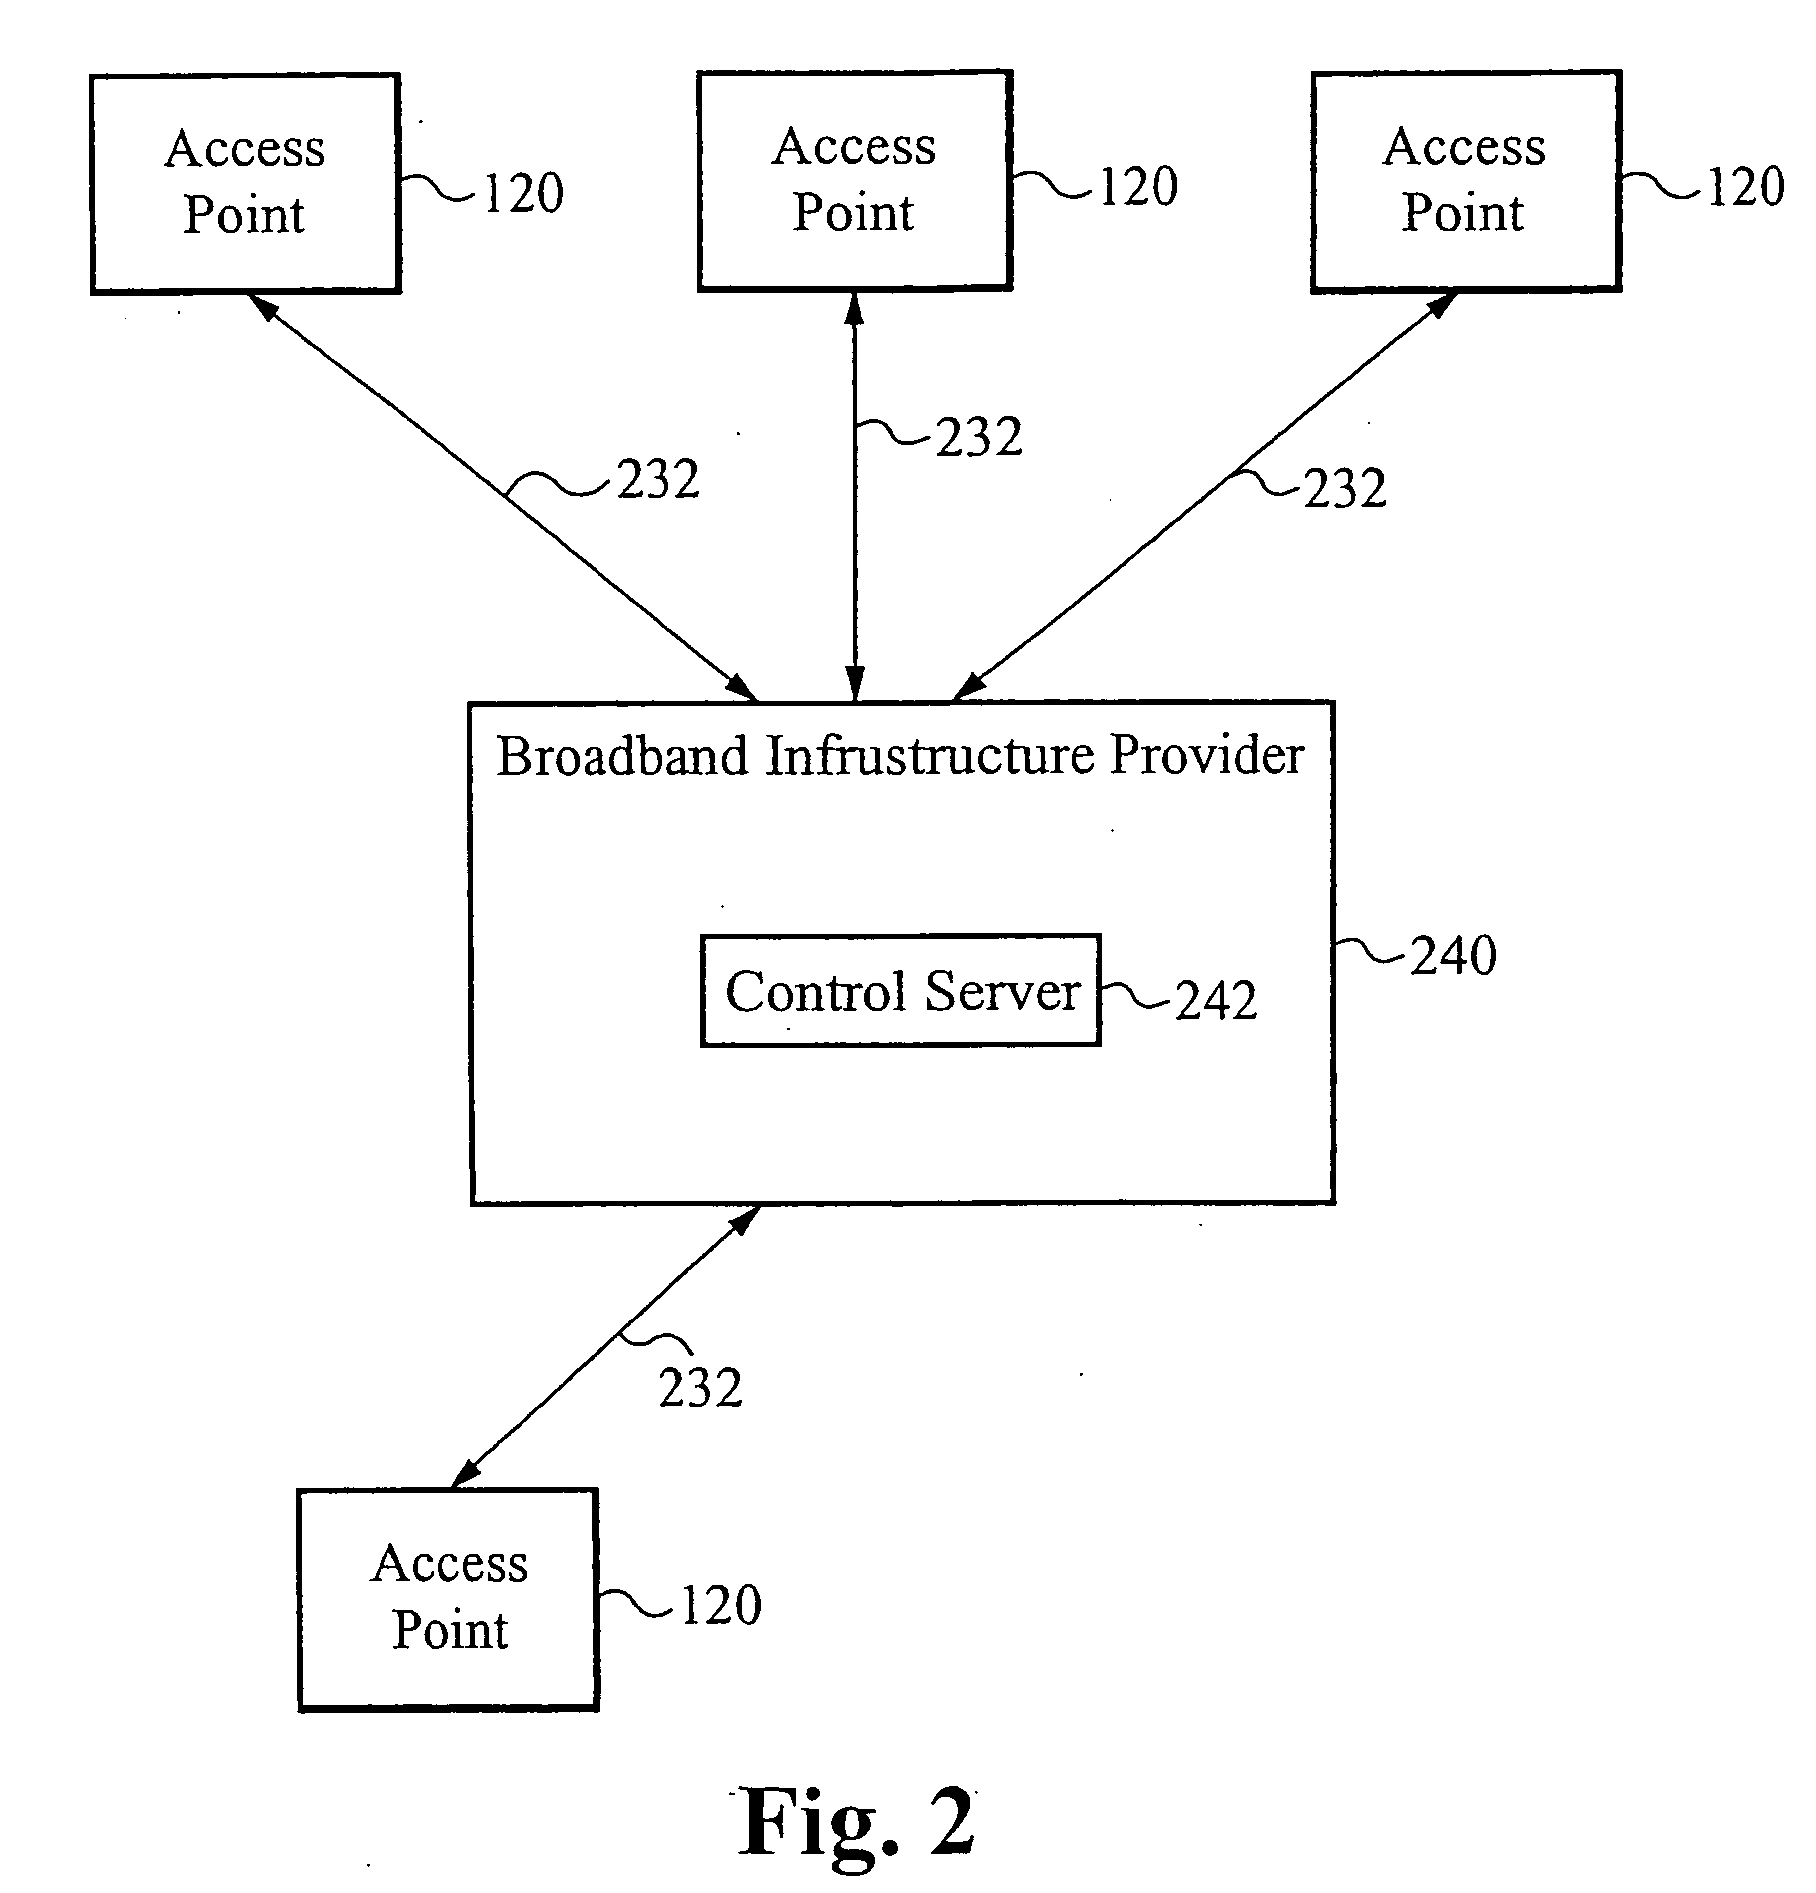 Method of determing broadband content usage within a system